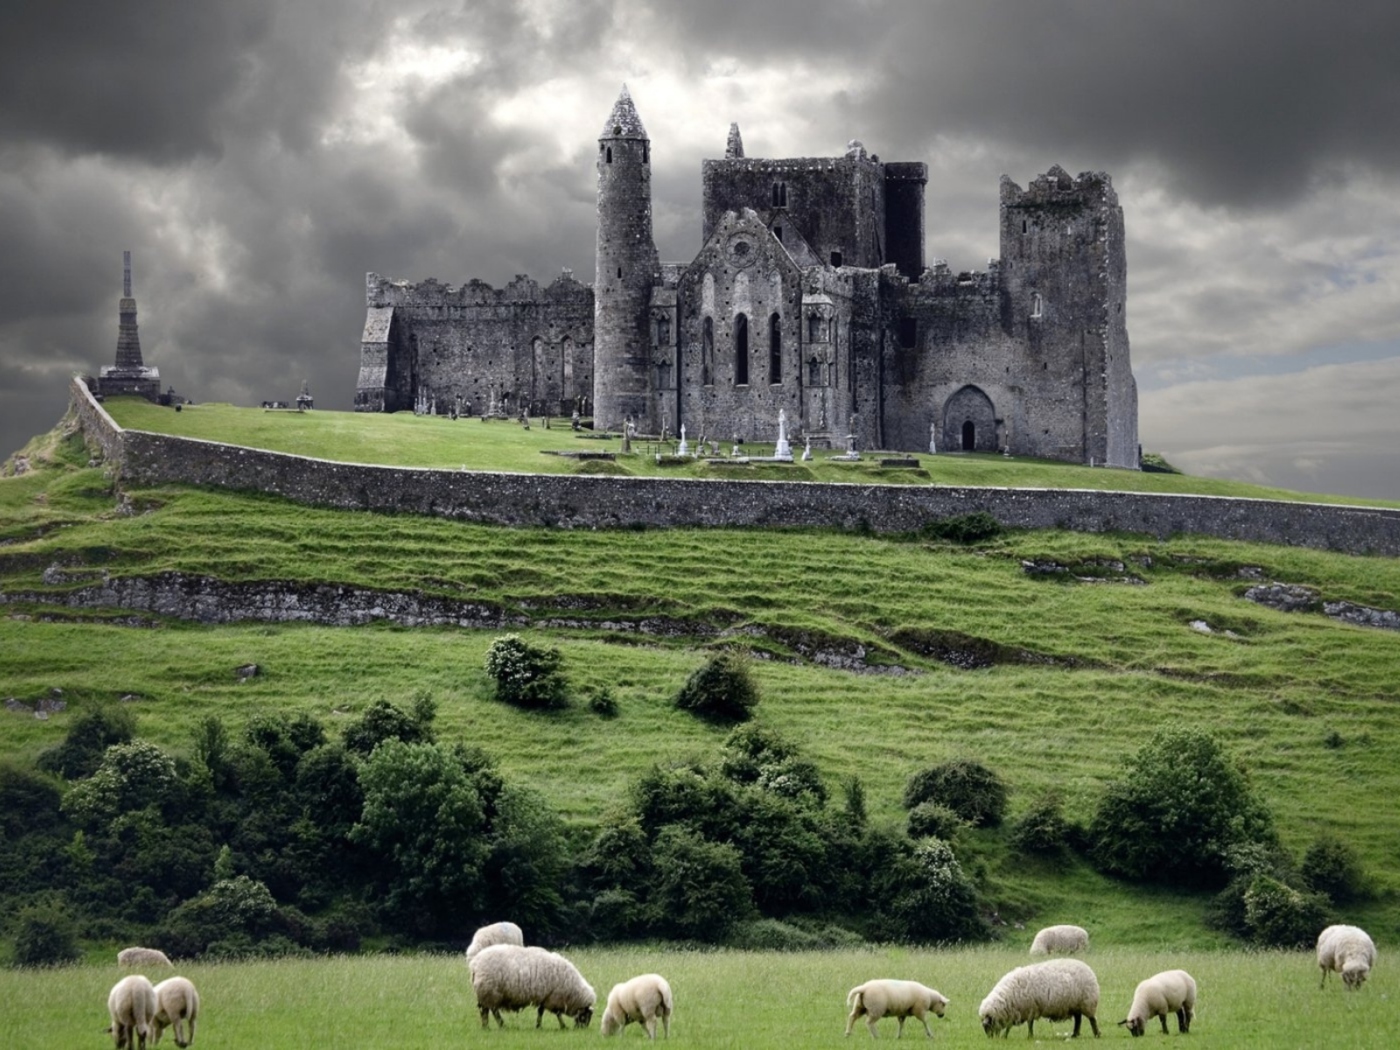 Das Ireland Landscape With Sheep And Castle Wallpaper 1400x1050